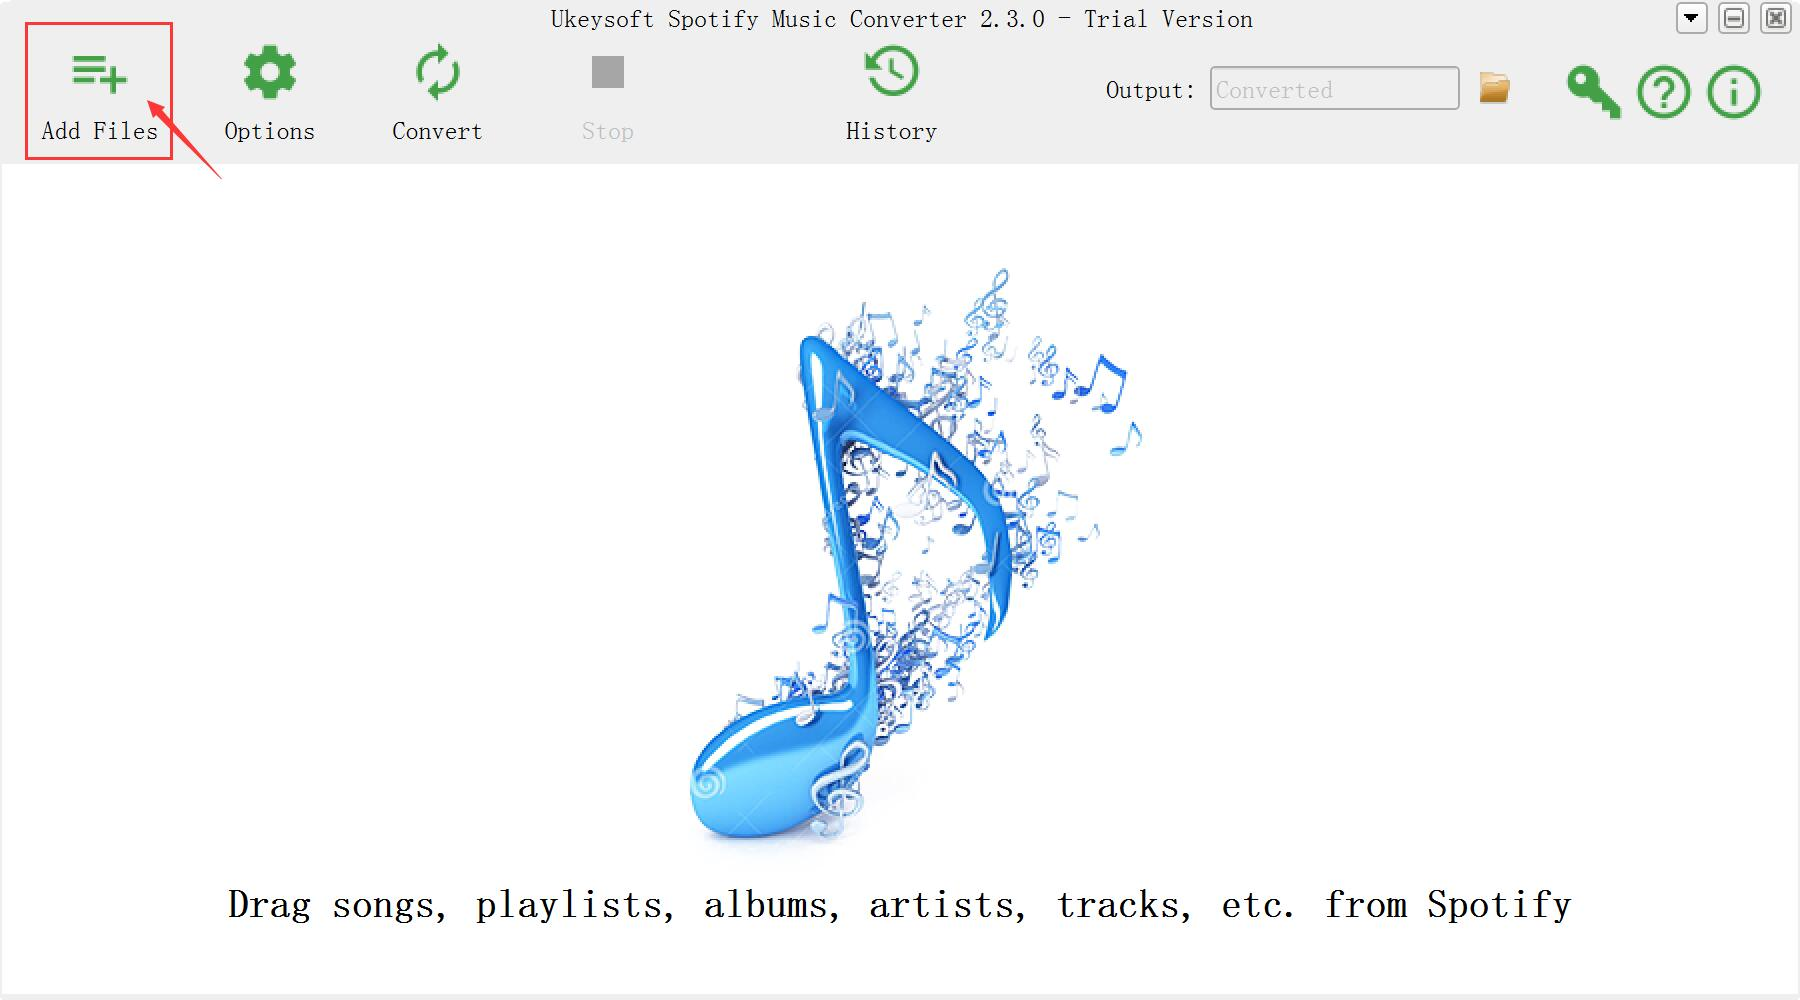 Spotify Music Converter home page